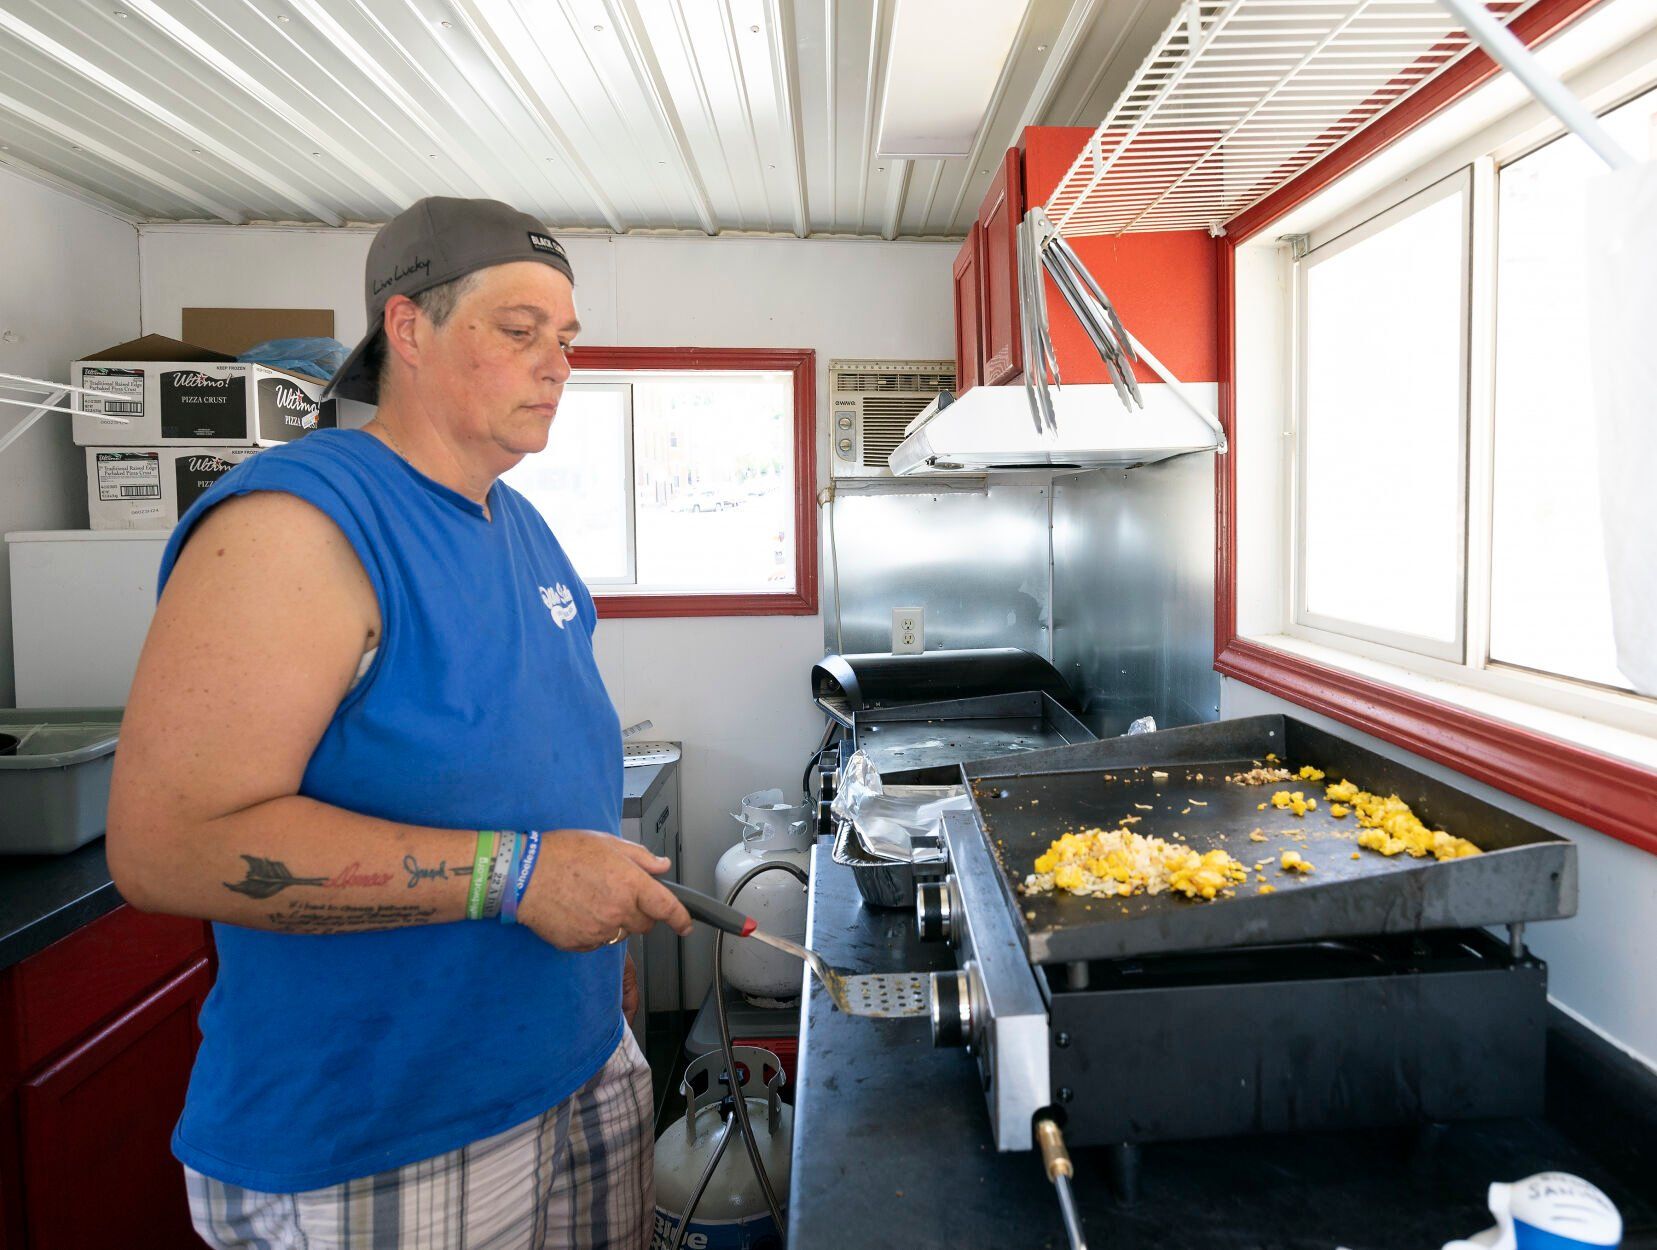 Owner Michelle Mulgrew prepares breakfast in her food truck, Other Side On The Go, while at the Dubuque Farmers Market on Saturday, June 3, 2023.    PHOTO CREDIT: Stephen Gassman